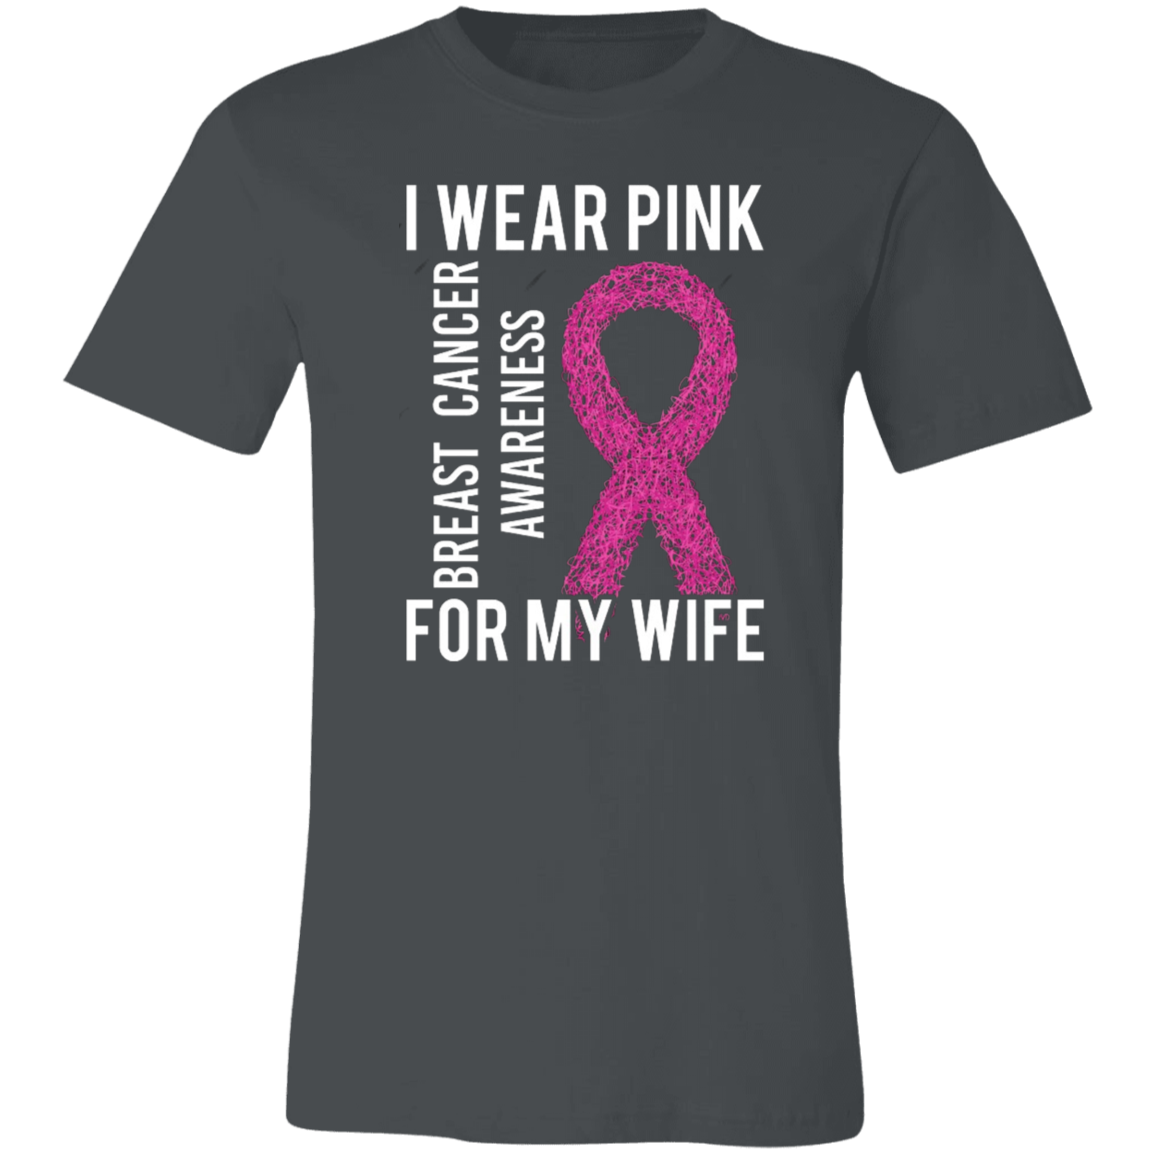 I Wear Pink For My Wife Unisex Jersey Short-Sleeve T-Shirt